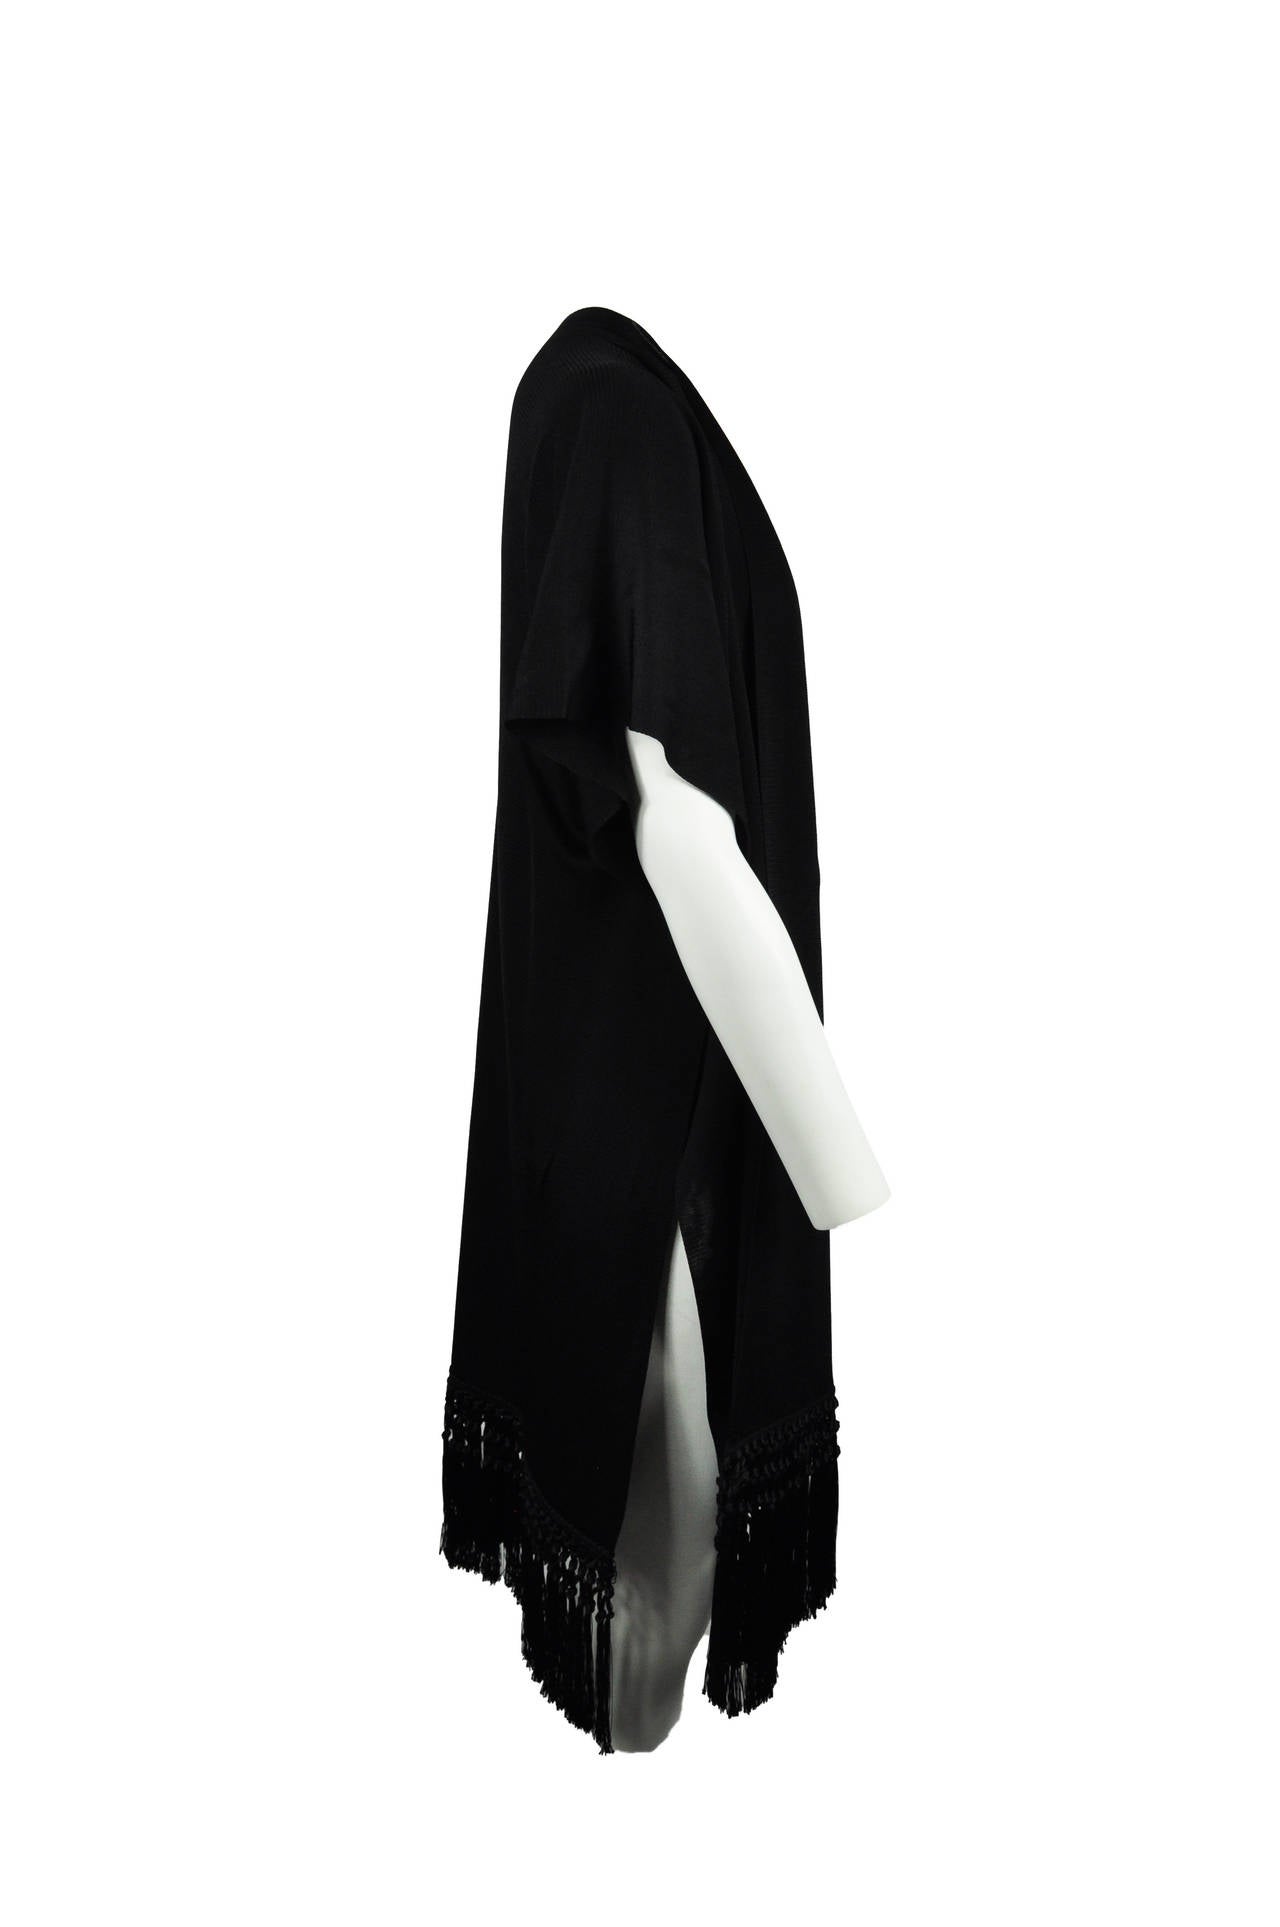 Valentino 2014 Spring-summer Black Fringed Poncho In Excellent Condition For Sale In Hong Kong, Hong Kong